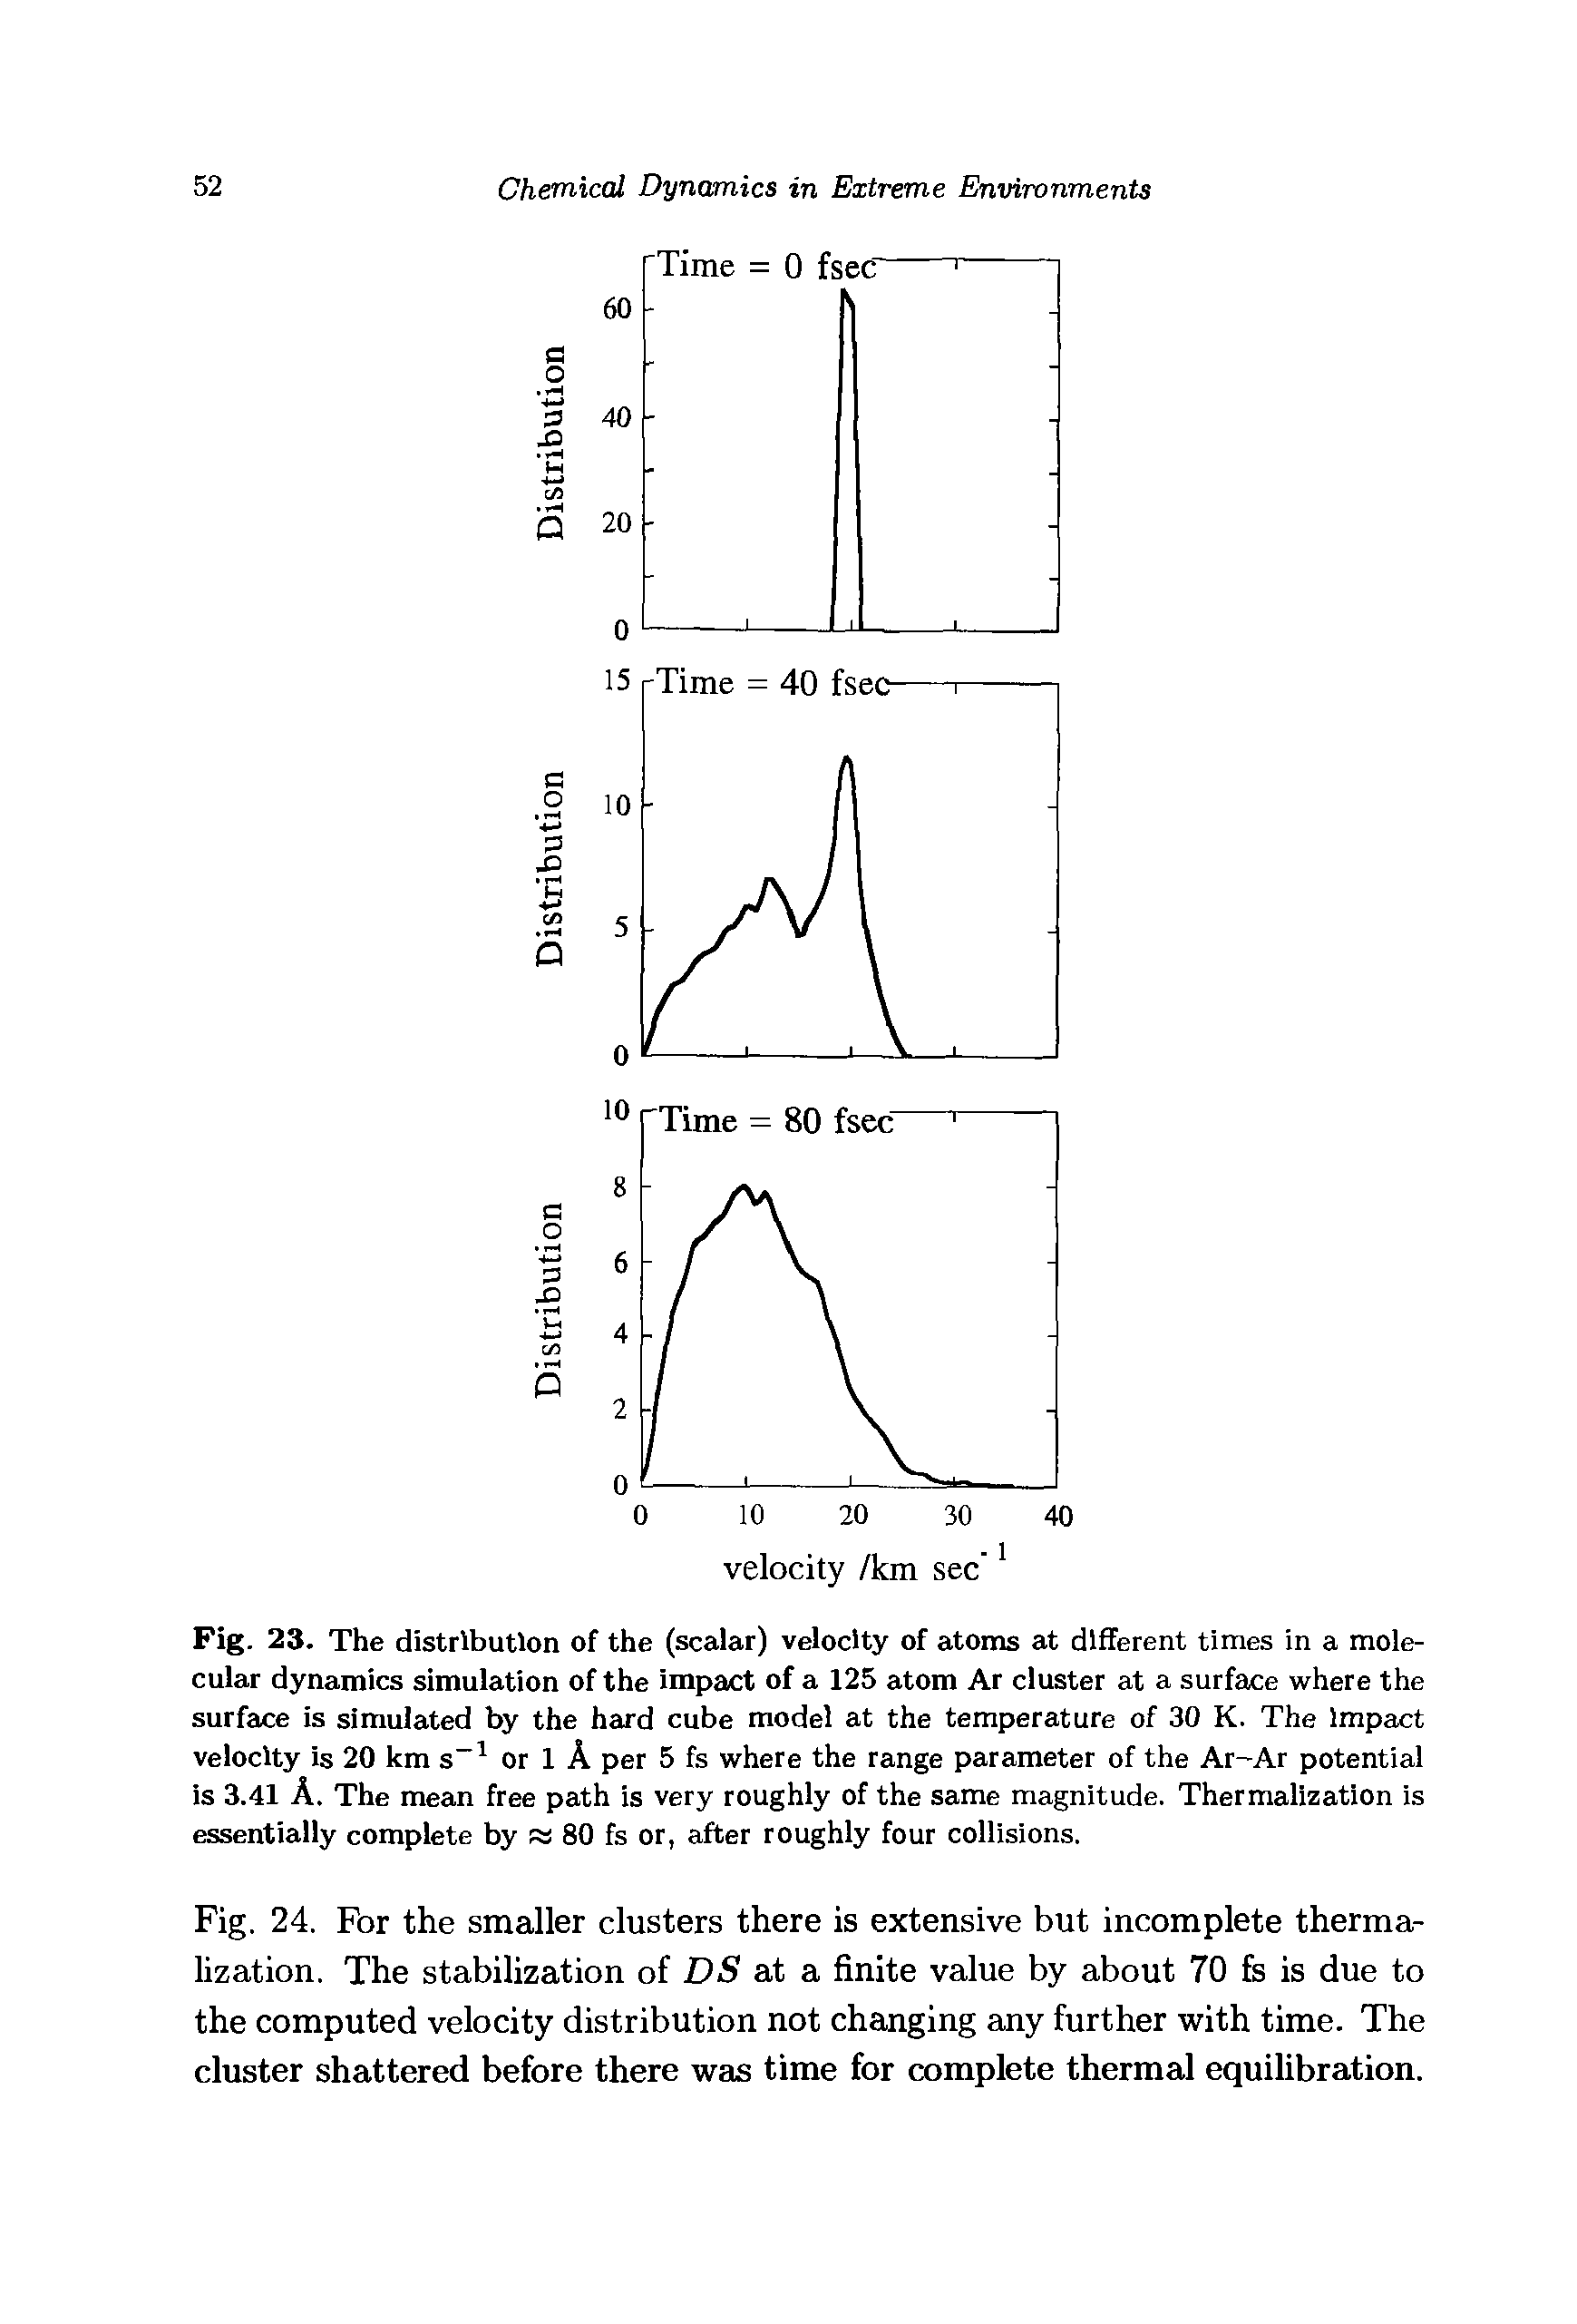 Fig. 23. The distribution of the (scalar) velocity of atoms at different times in a molecular dynamics simulation of the impact of a 125 atom Ar cluster at a surface where the surface is simulated by the hard cube model at the temperature of 30 K. The Impact velocity is 20 km s or 1 A per 5 fs where the range parameter of the Ar-Ar potential is 3.41 A. The mean free path is very roughly of the same magnitude. Thermalization is essentially complete by 80 fs or, after roughly four collisions.